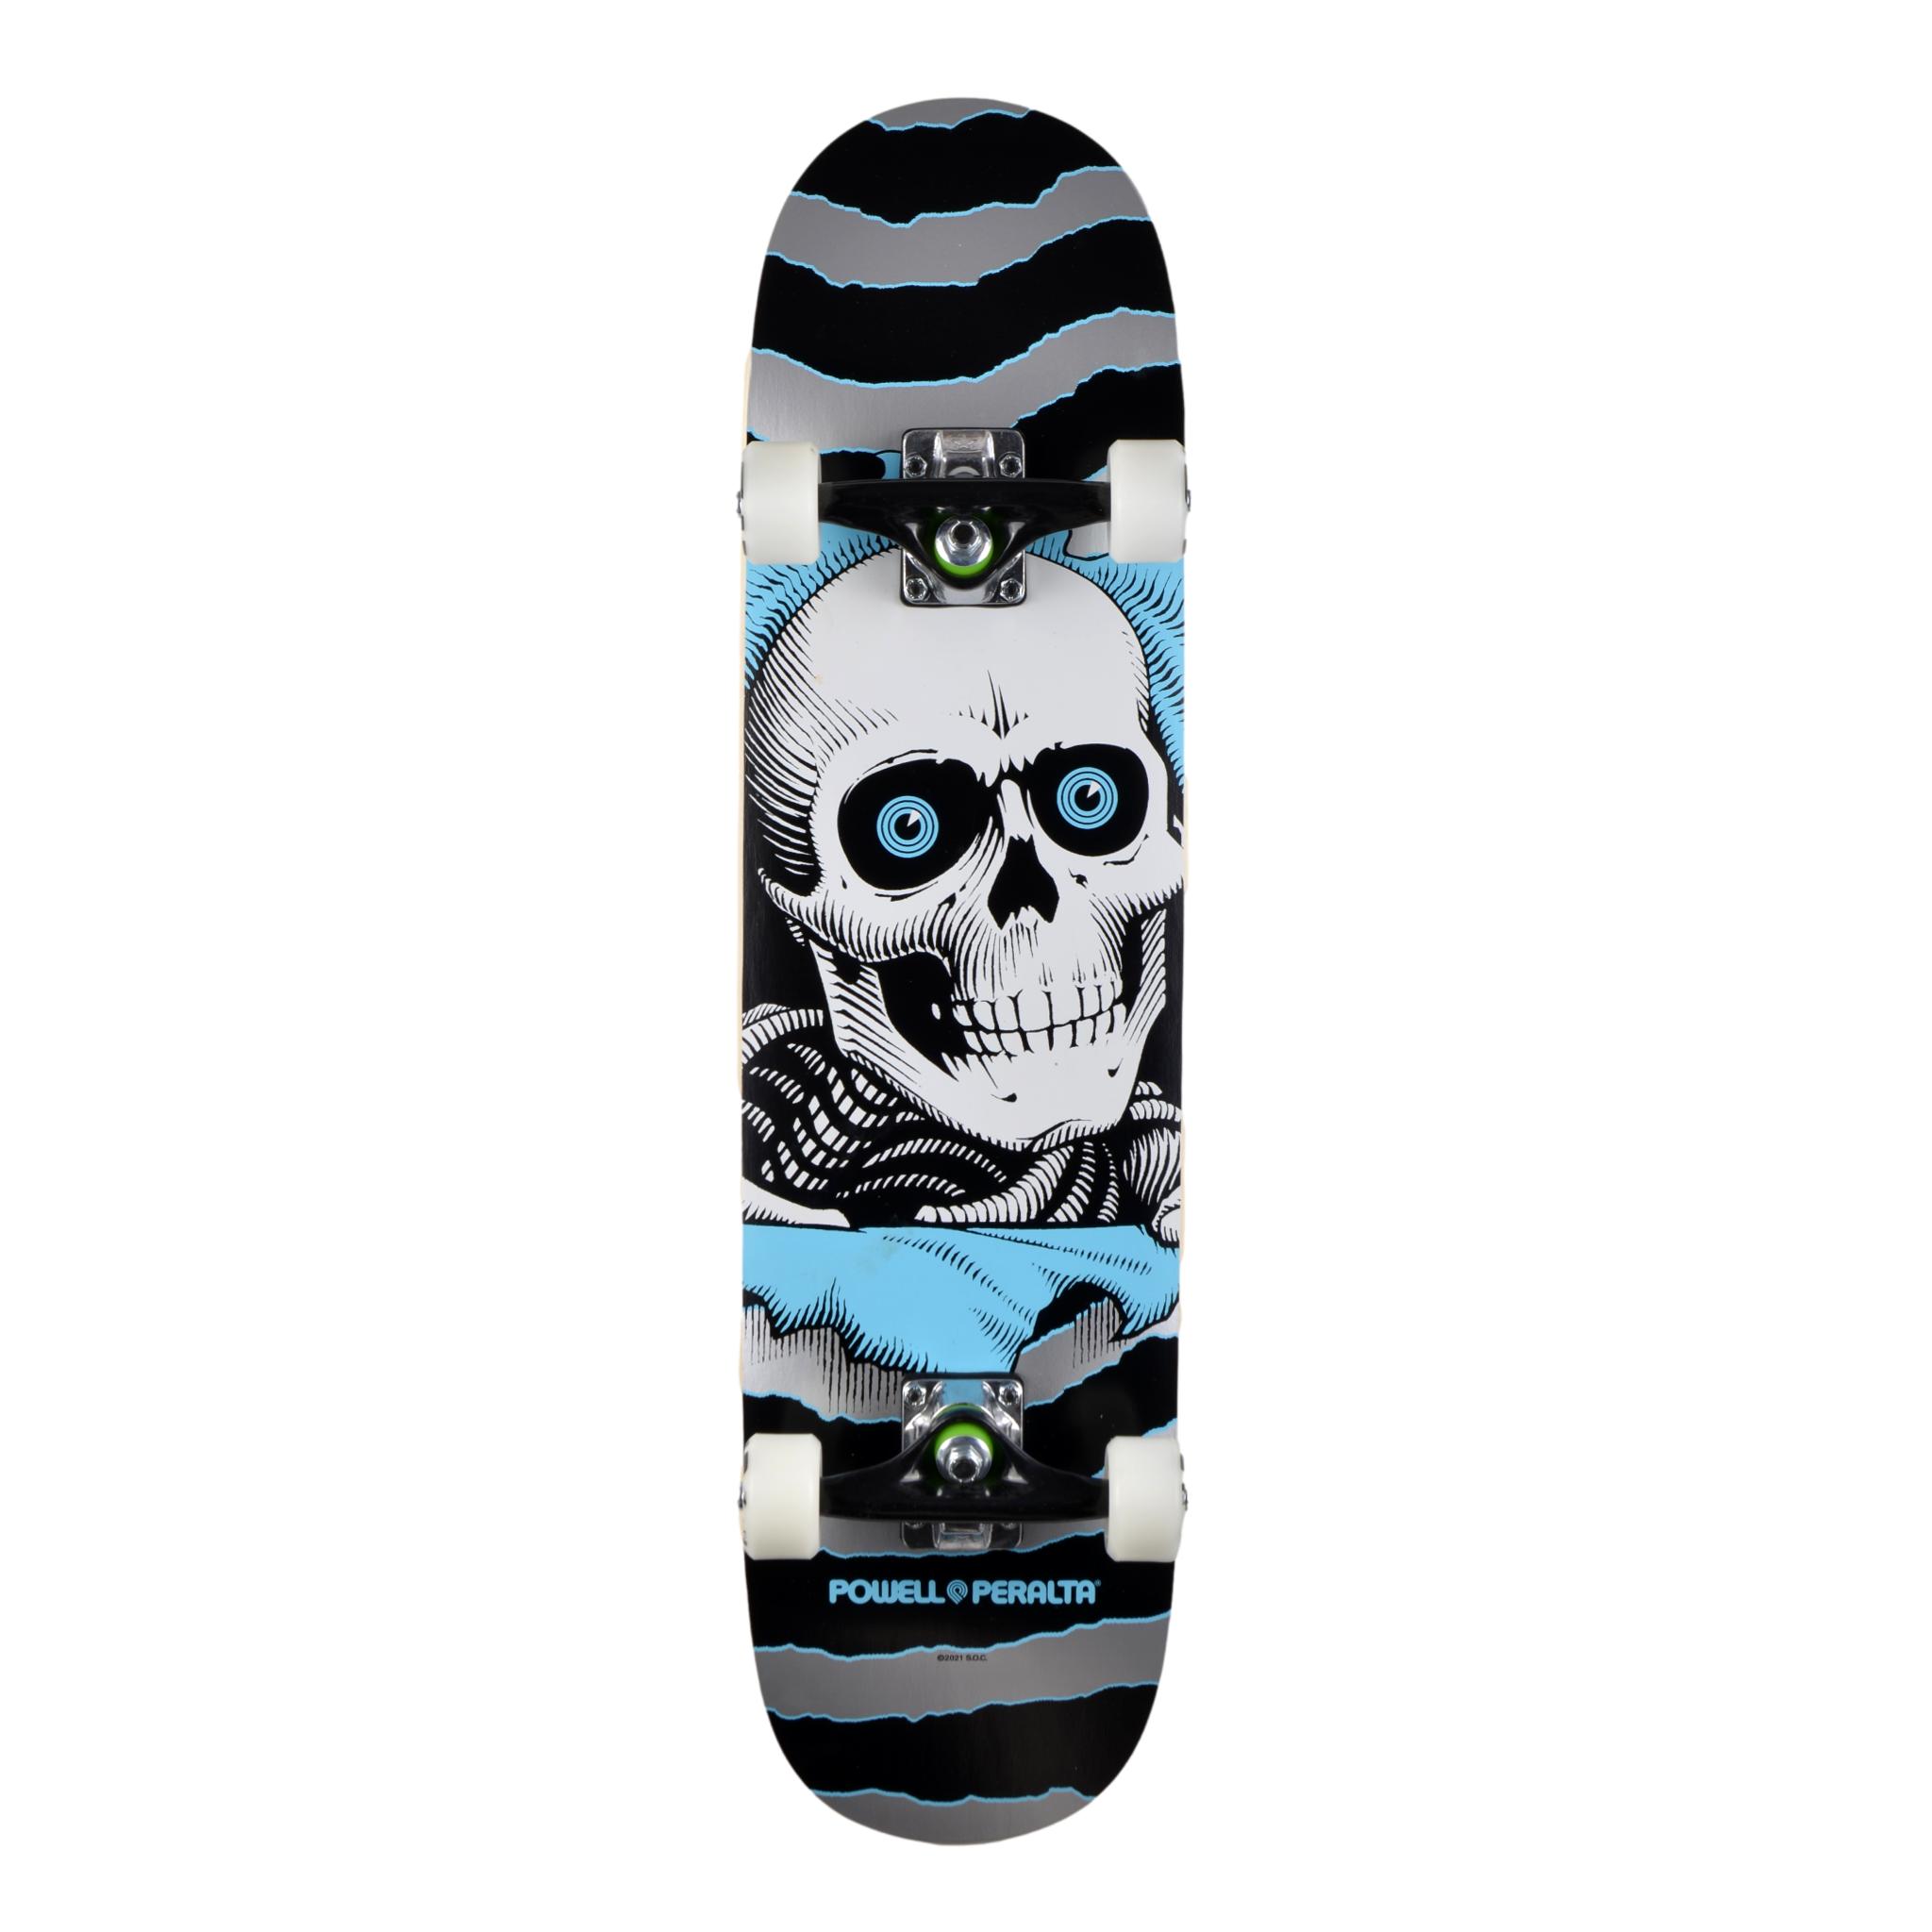 POWELL PERALTA RIPPER ONE OFF COMPLETO 7.75